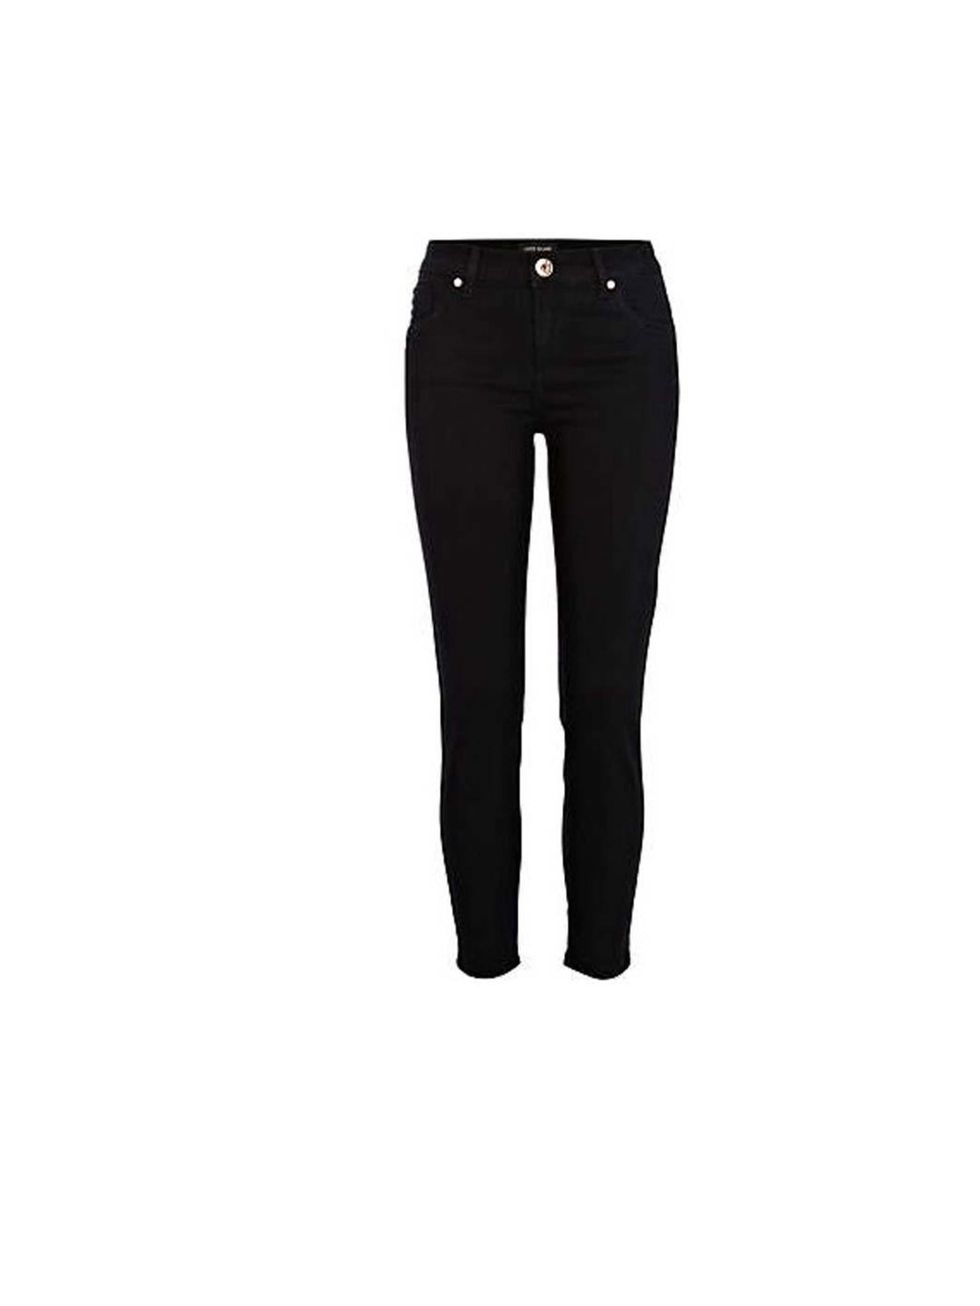 <p>A pair of black skinny jeans is always an unmistakable option.</p><p>Get these from <a href="http://www.riverisland.com/women/jeans/skinny-jeans/Black-Amelie-superskinny-jeans-642408">River Island,</a> £30</p>